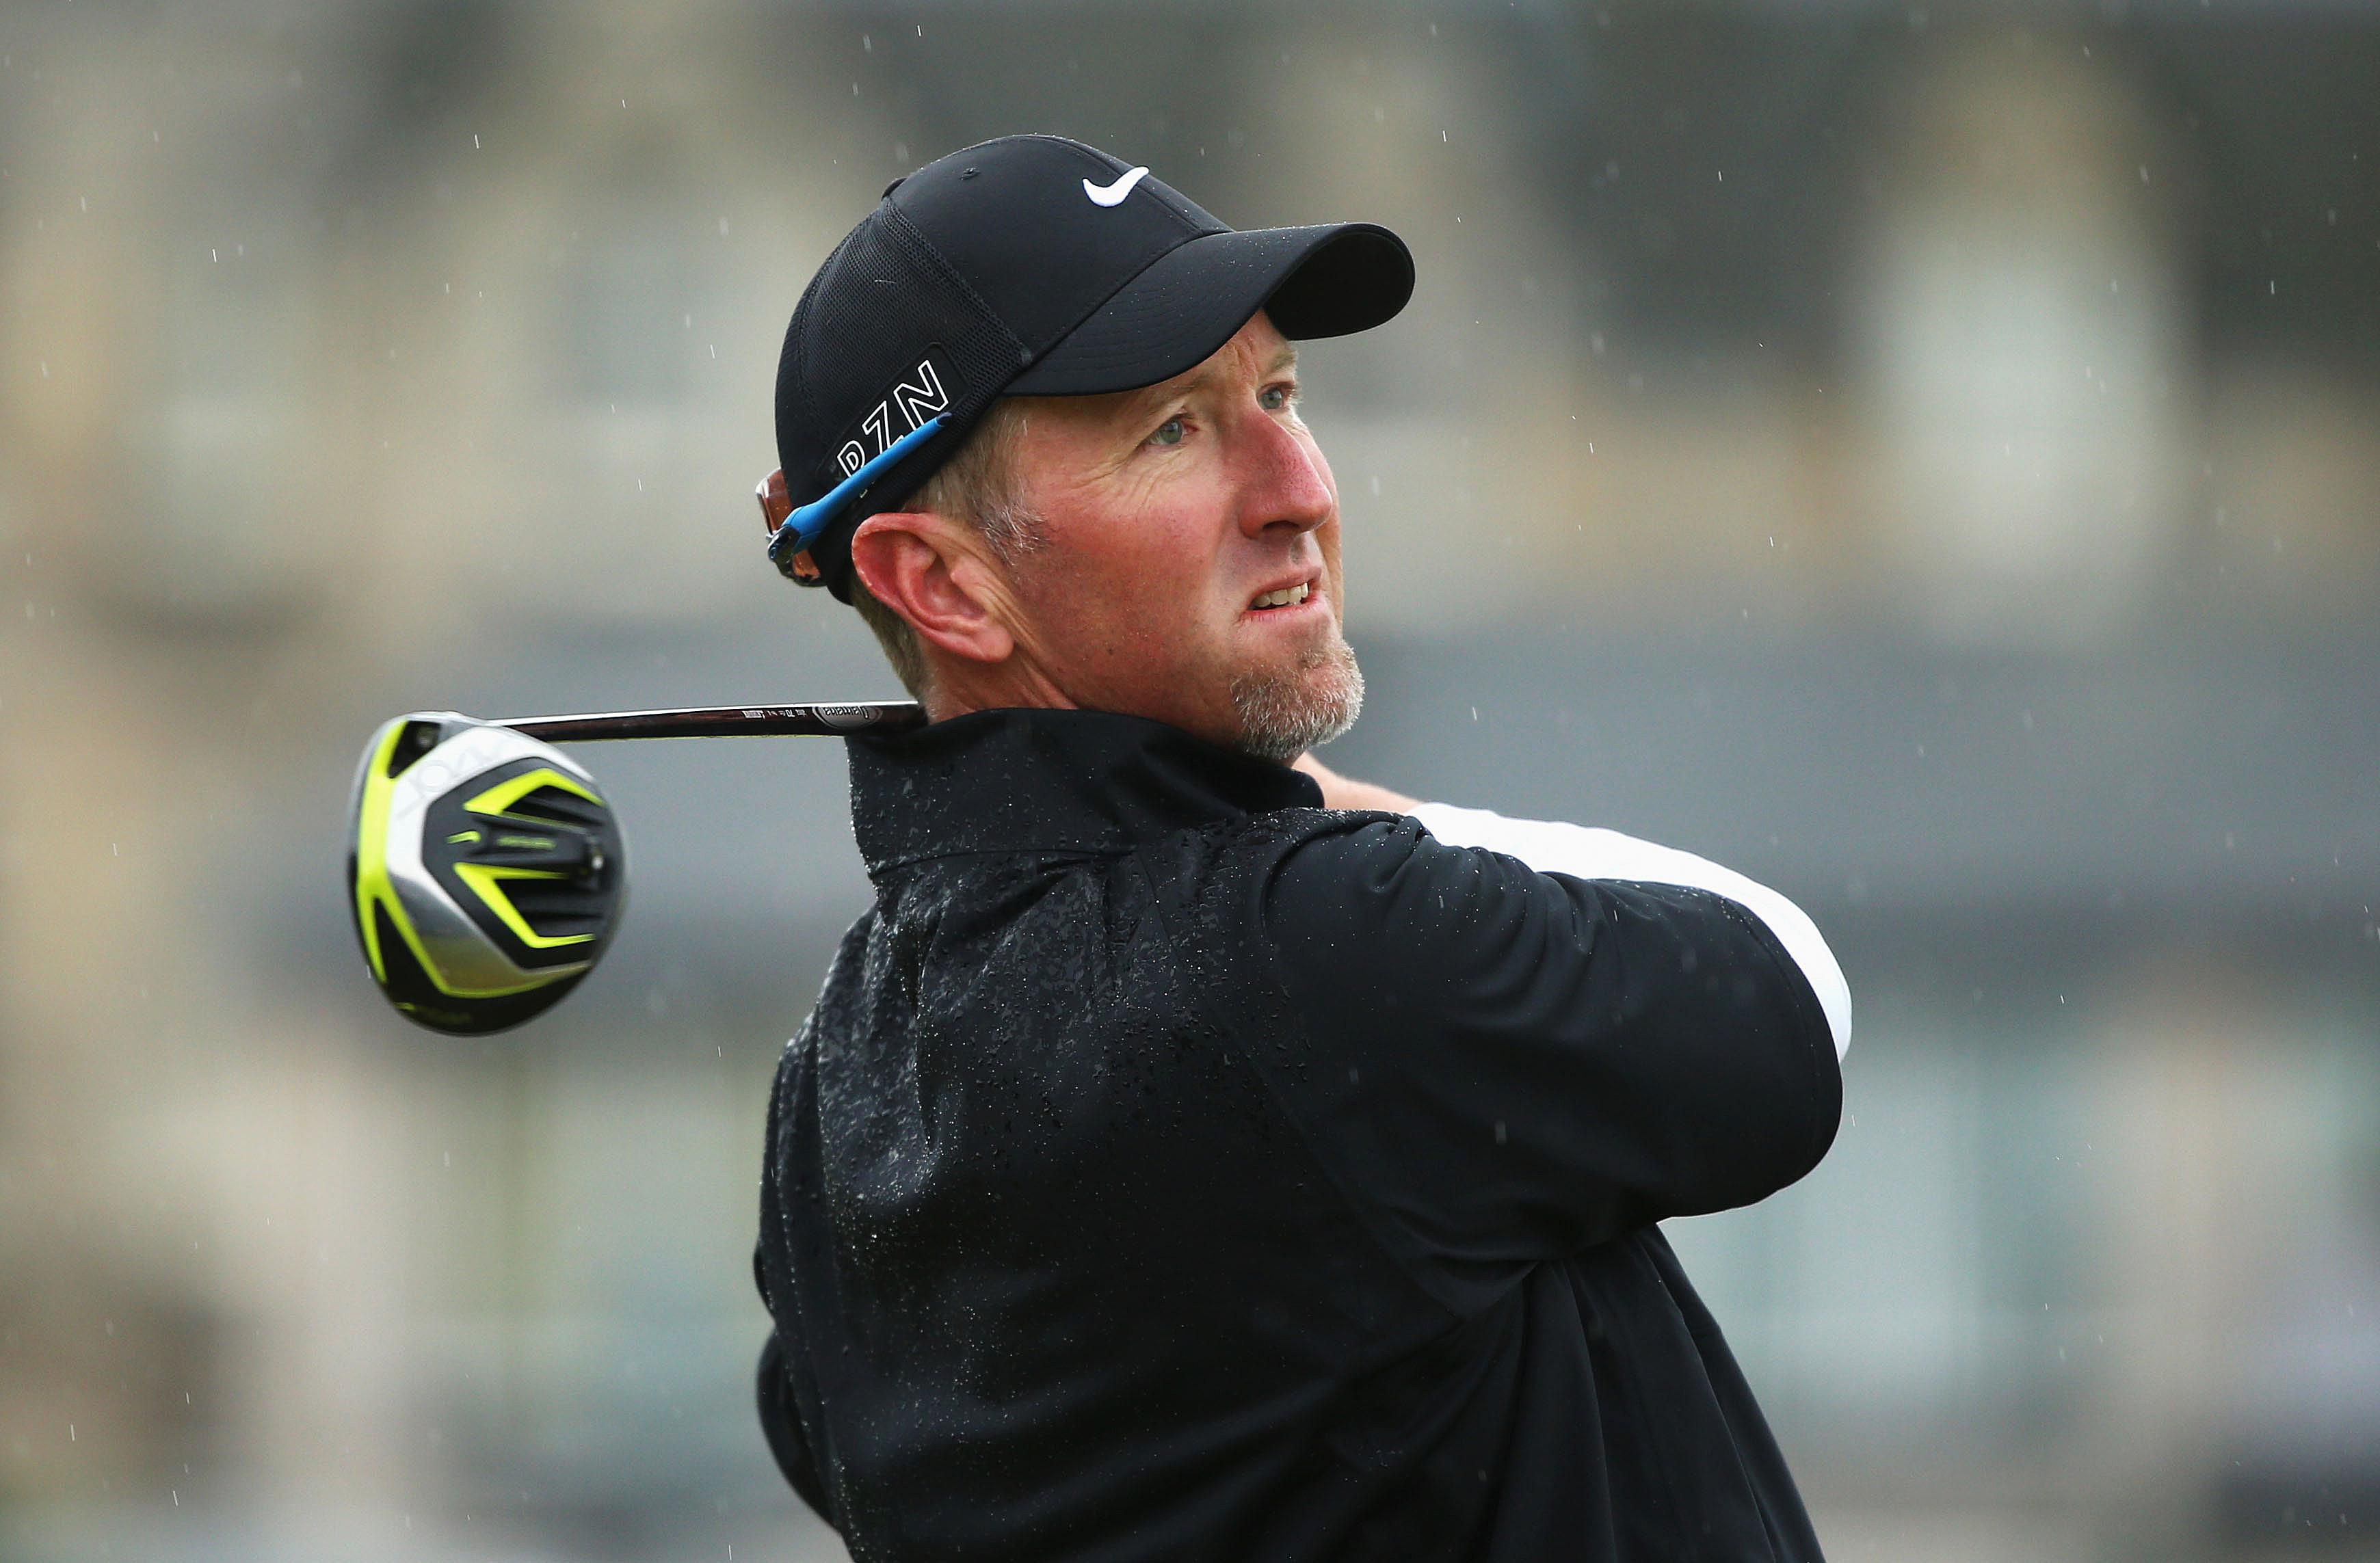 Golfer David Duval Biography and Career Facts